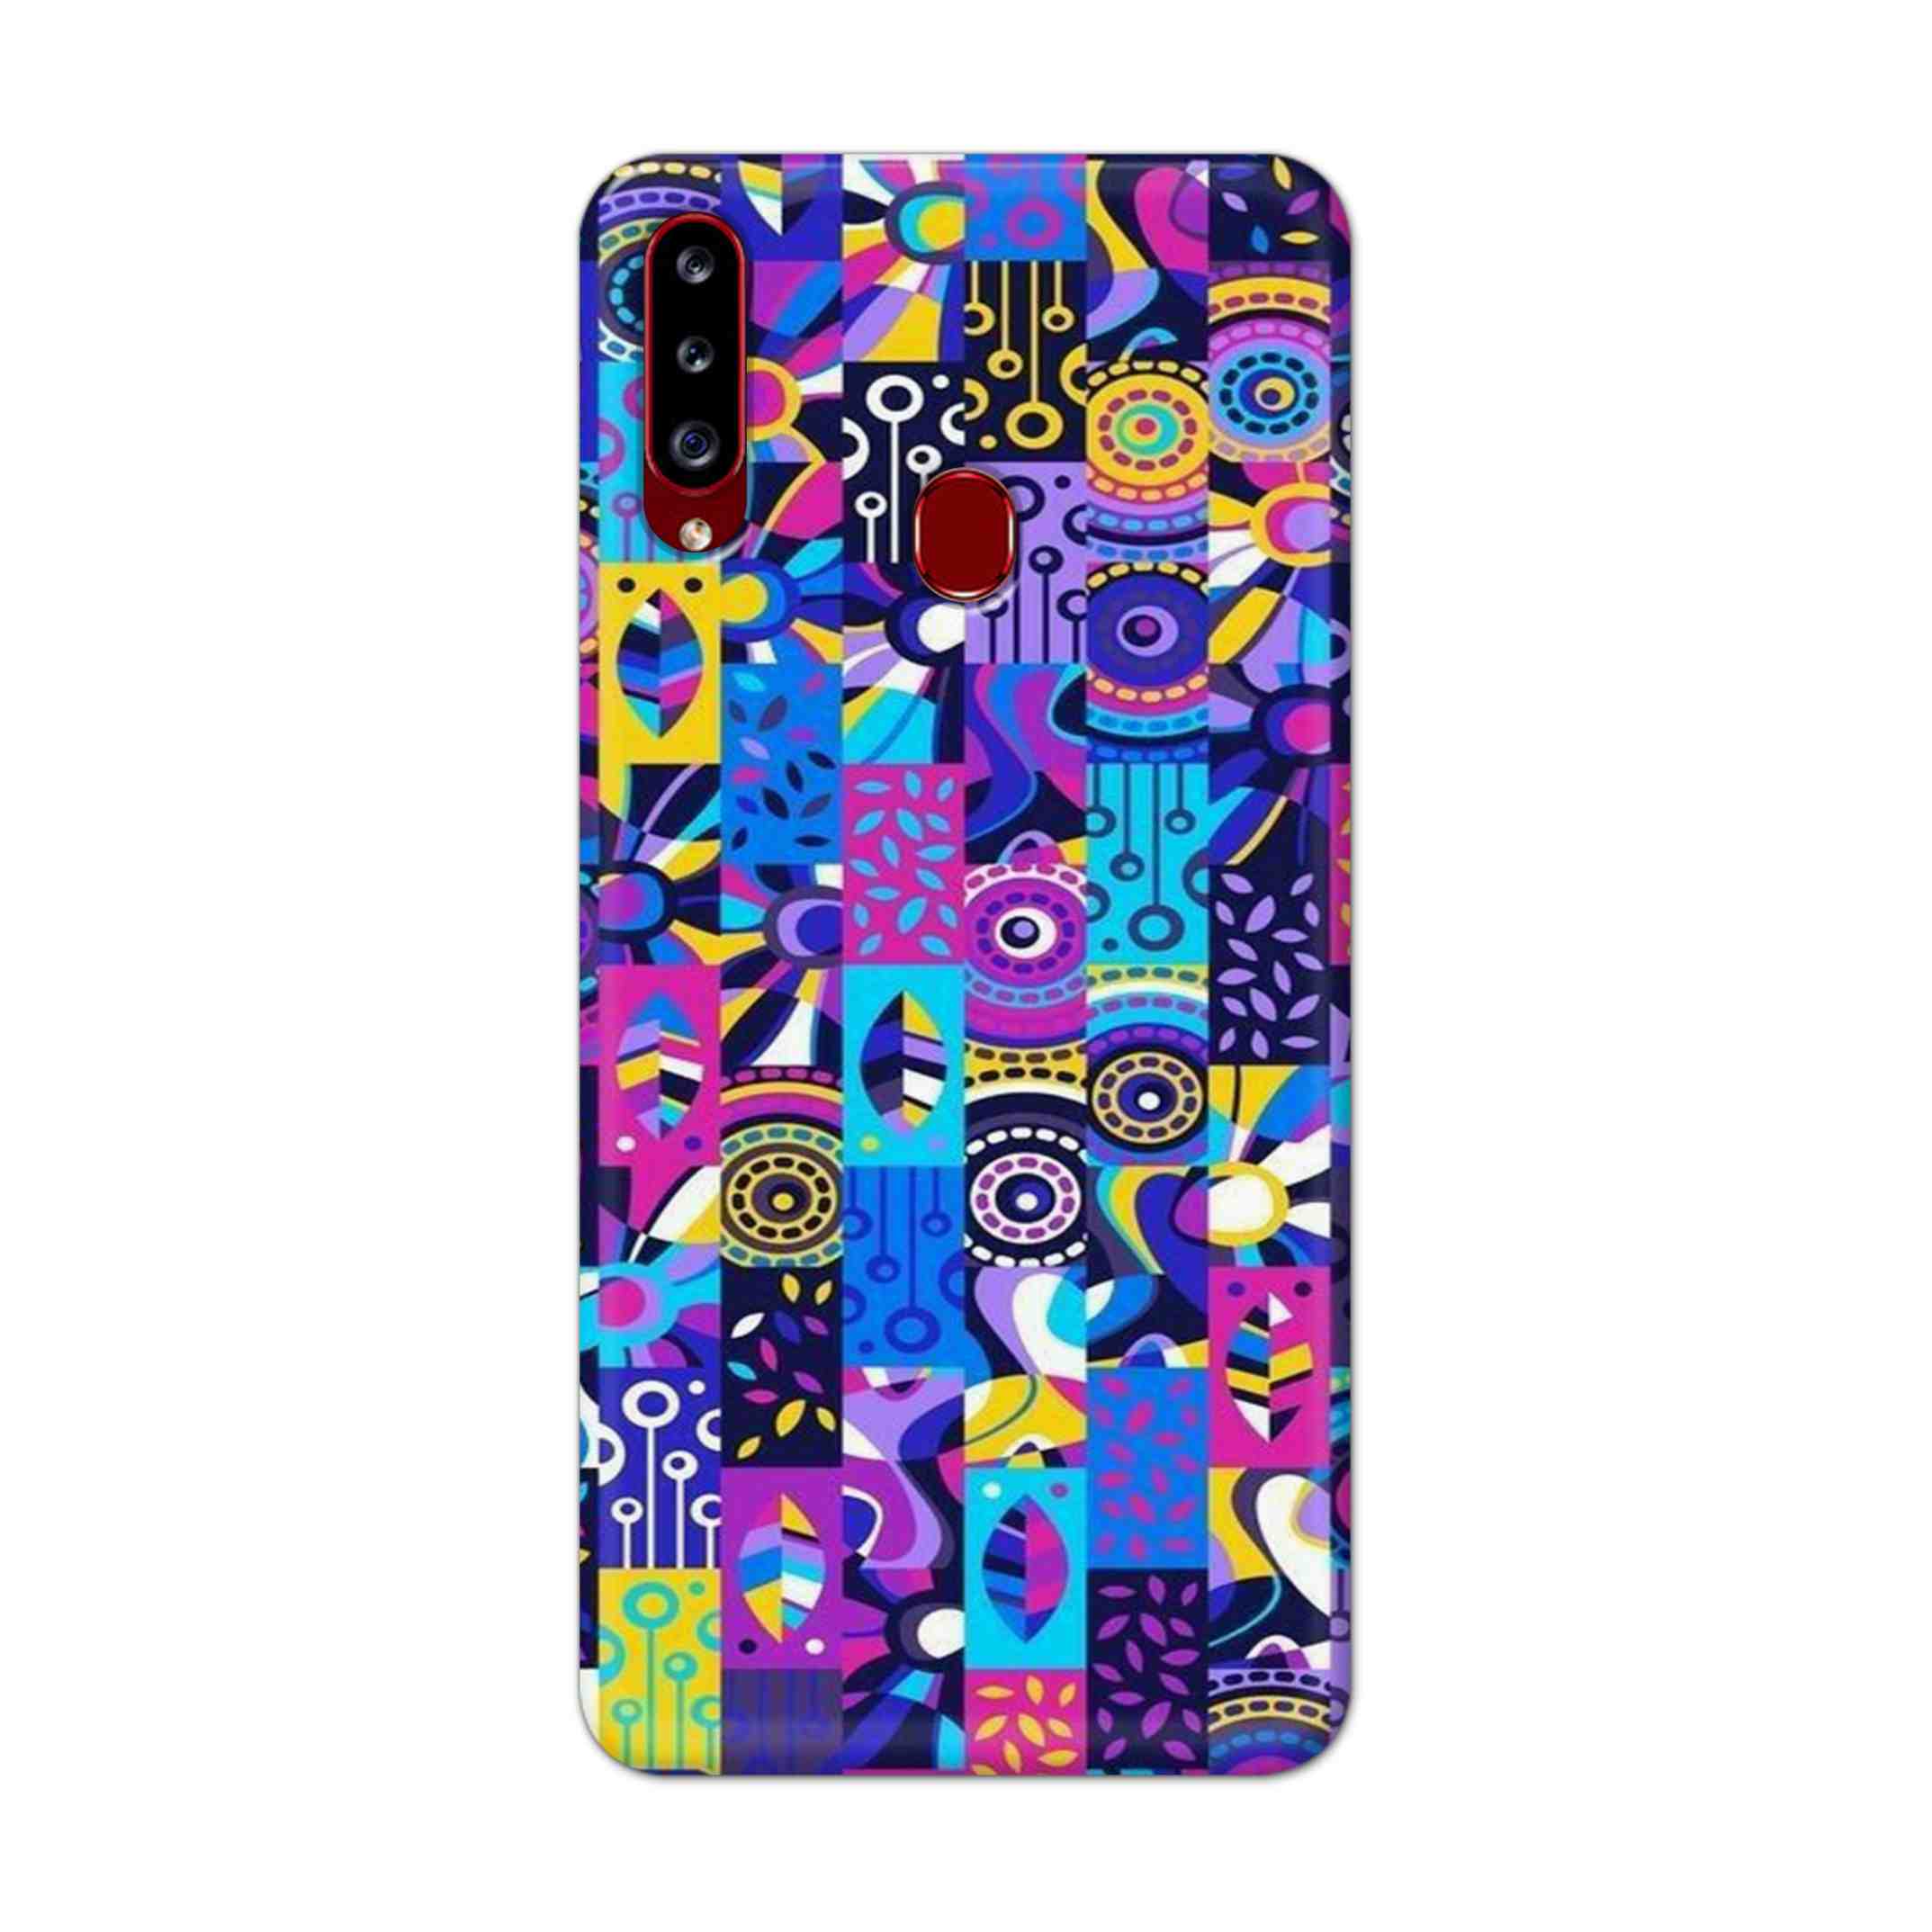 Buy Rainbow Art Hard Back Mobile Phone Case Cover For Samsung A20s Online